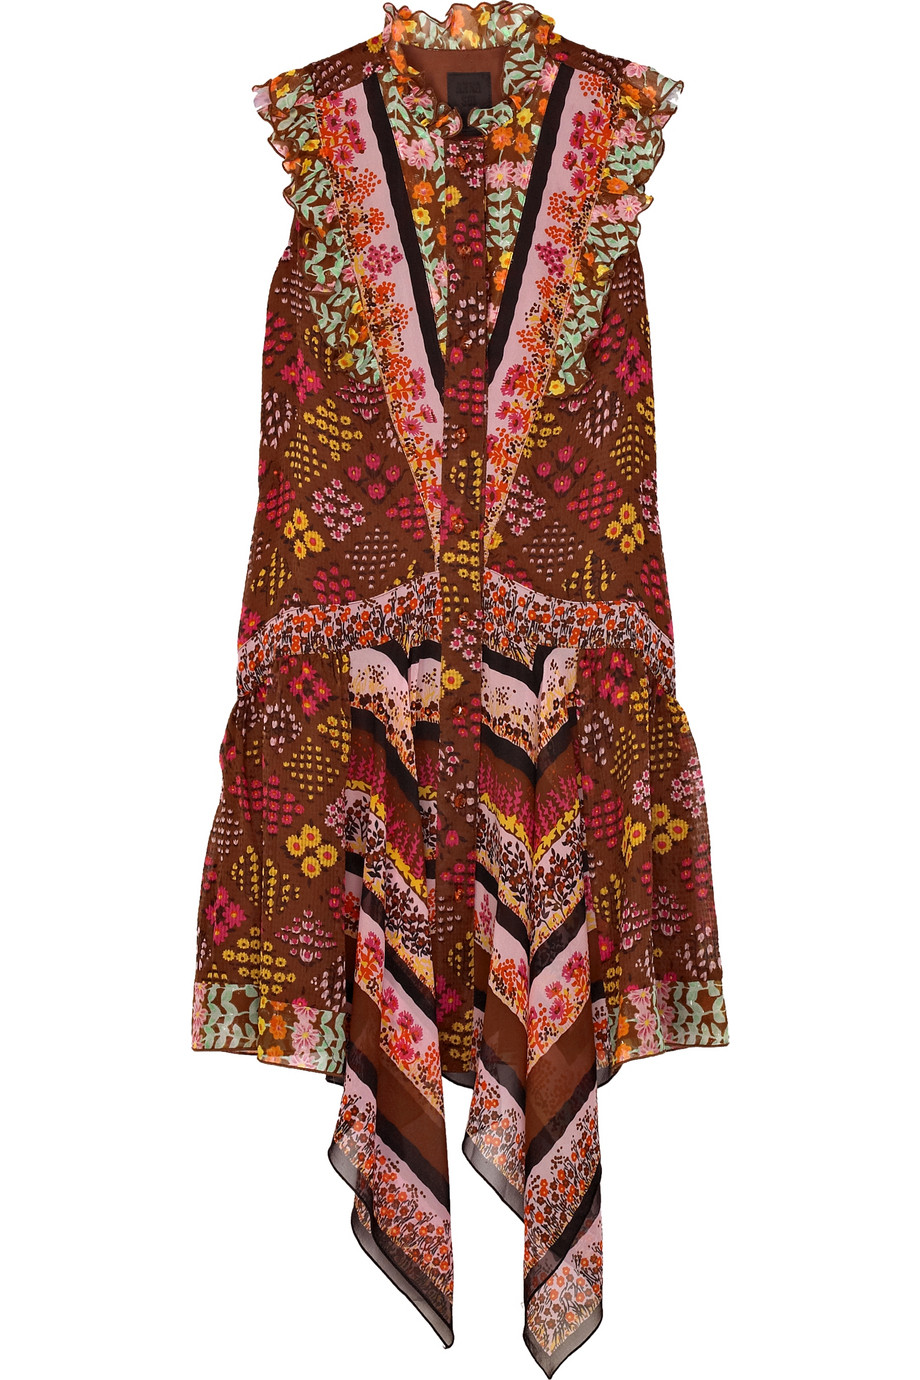 Anna sui Printed Silk-crepe Dress in Red | Lyst